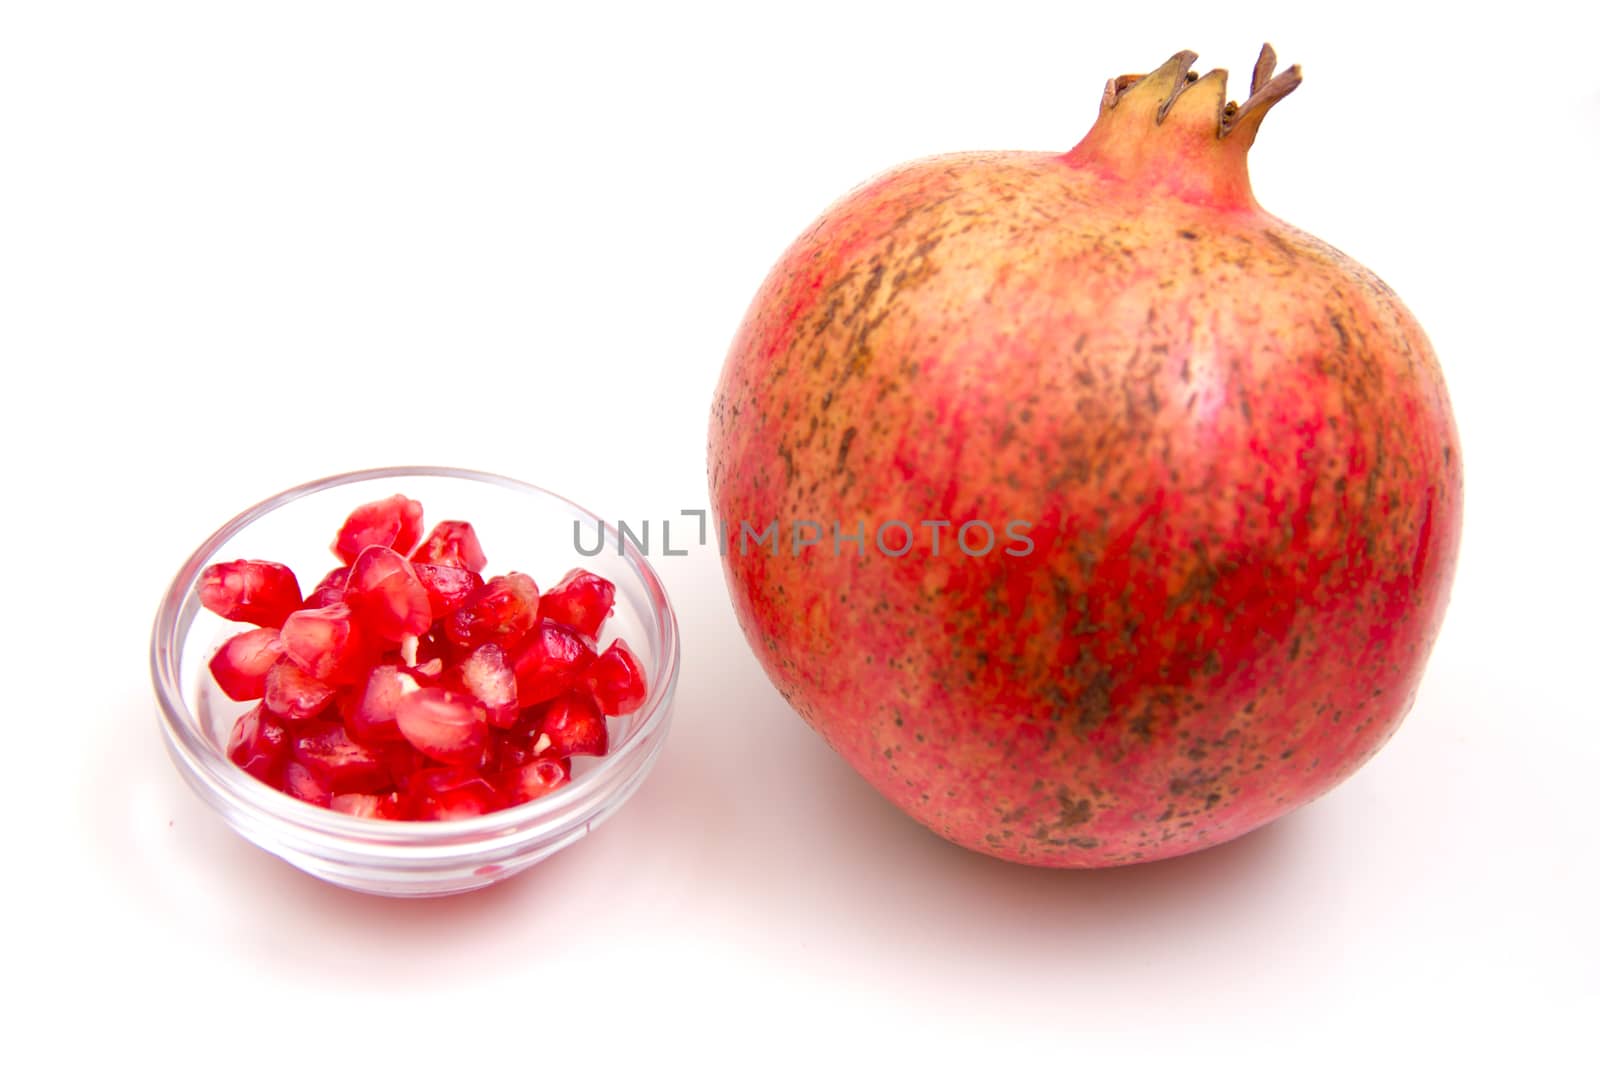 Pomegranate with grains seen up close on a white background